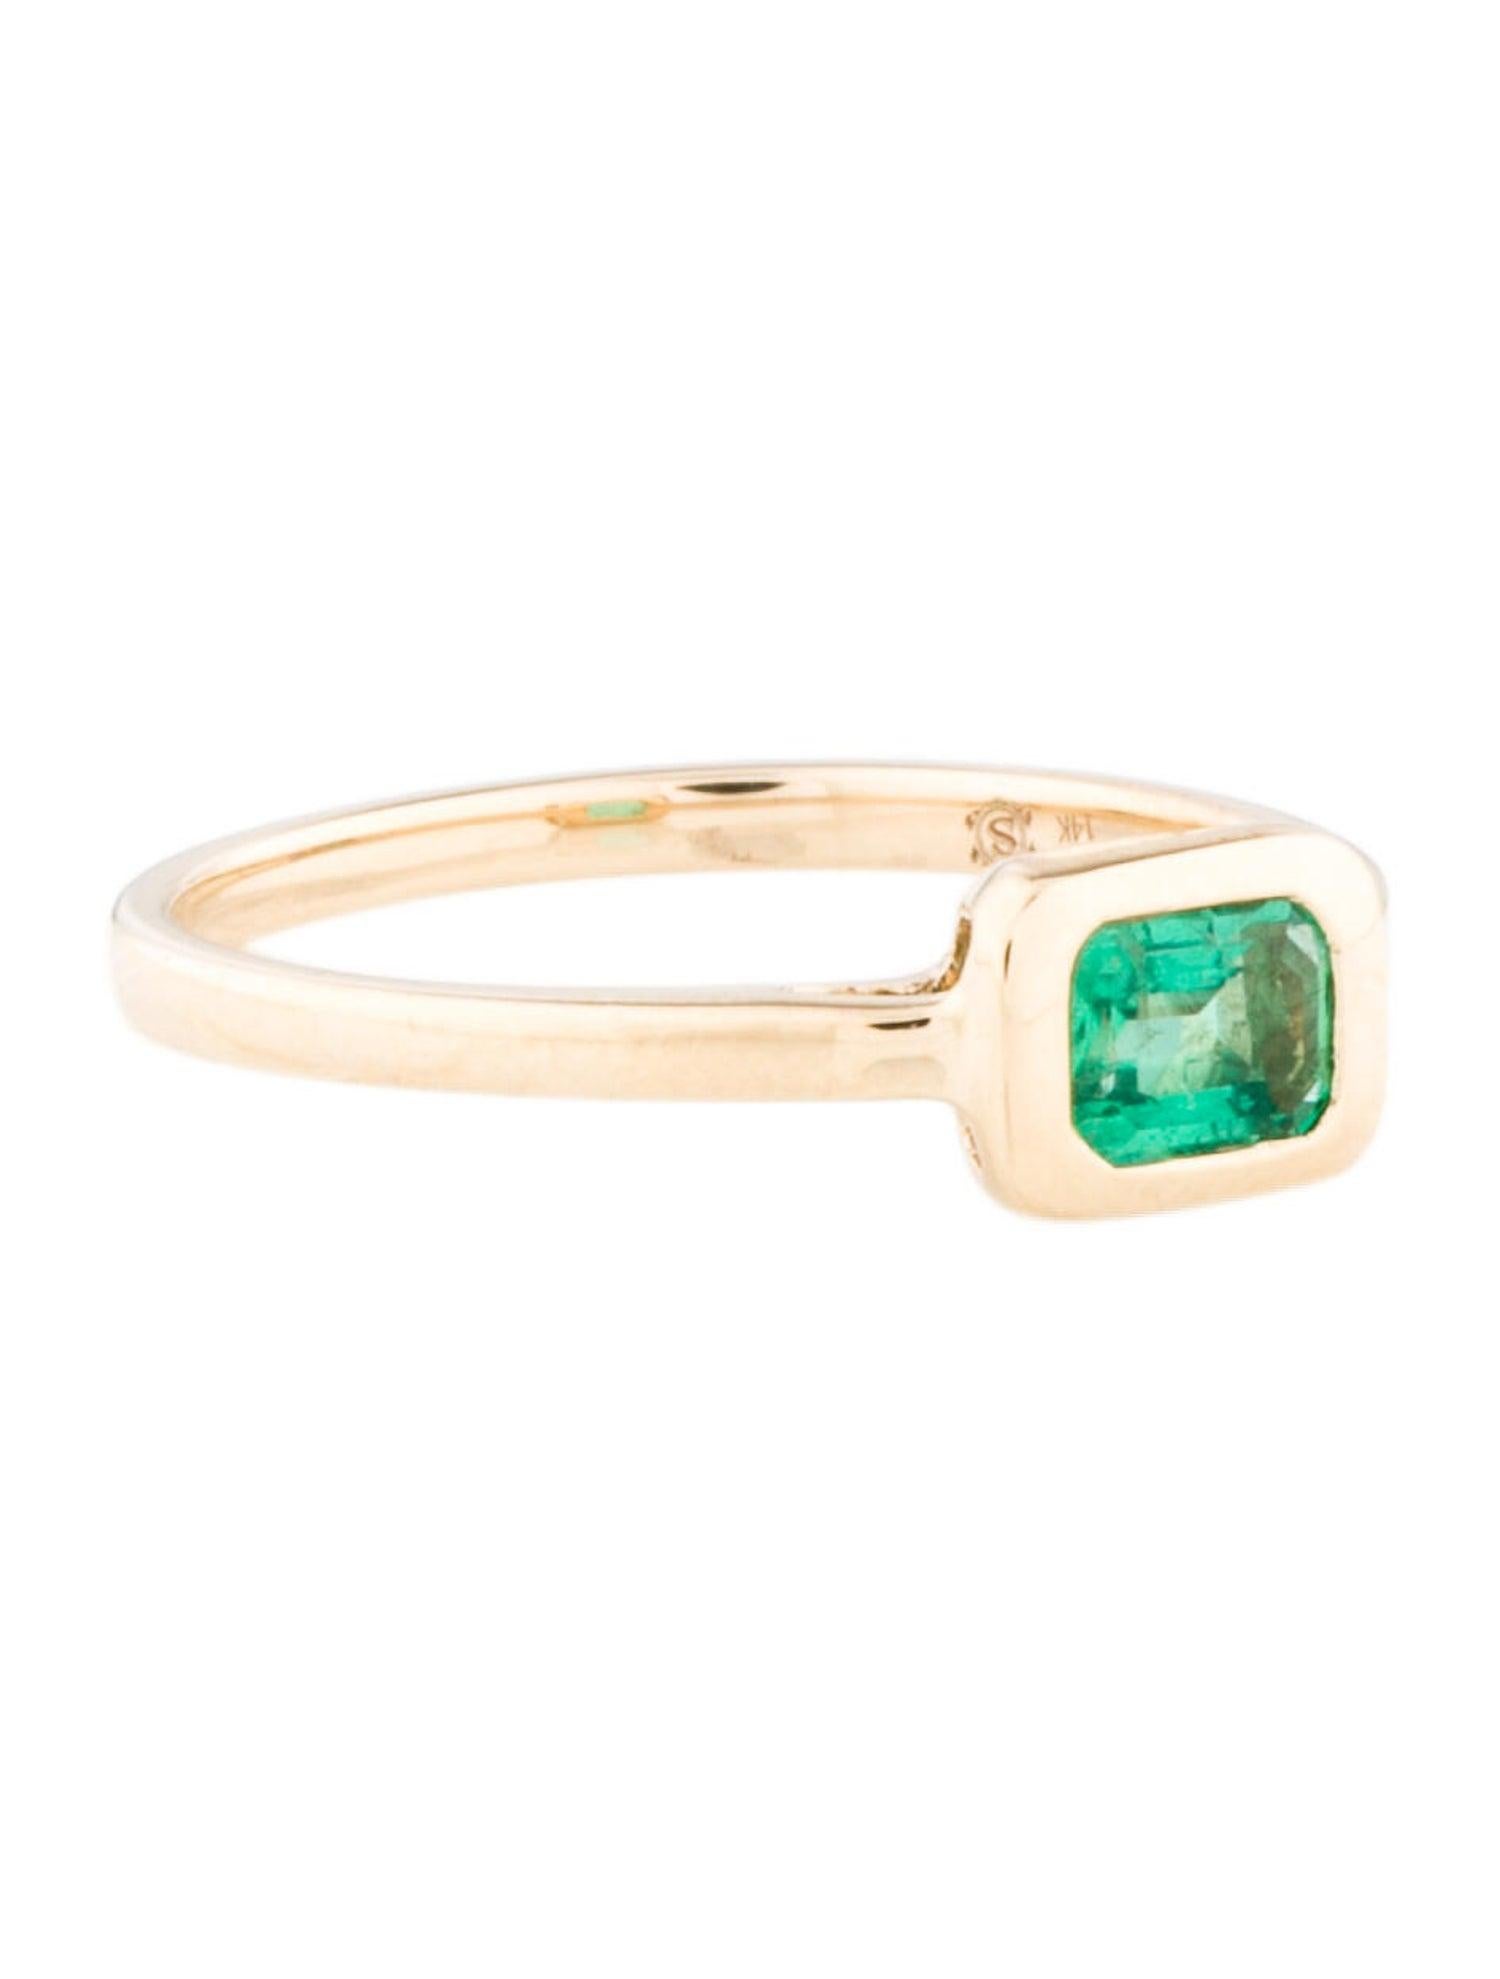 14k Gold & Emerald Ring 0.60 CTTW for Her, Emerald Cut Emerald for Ladies 1